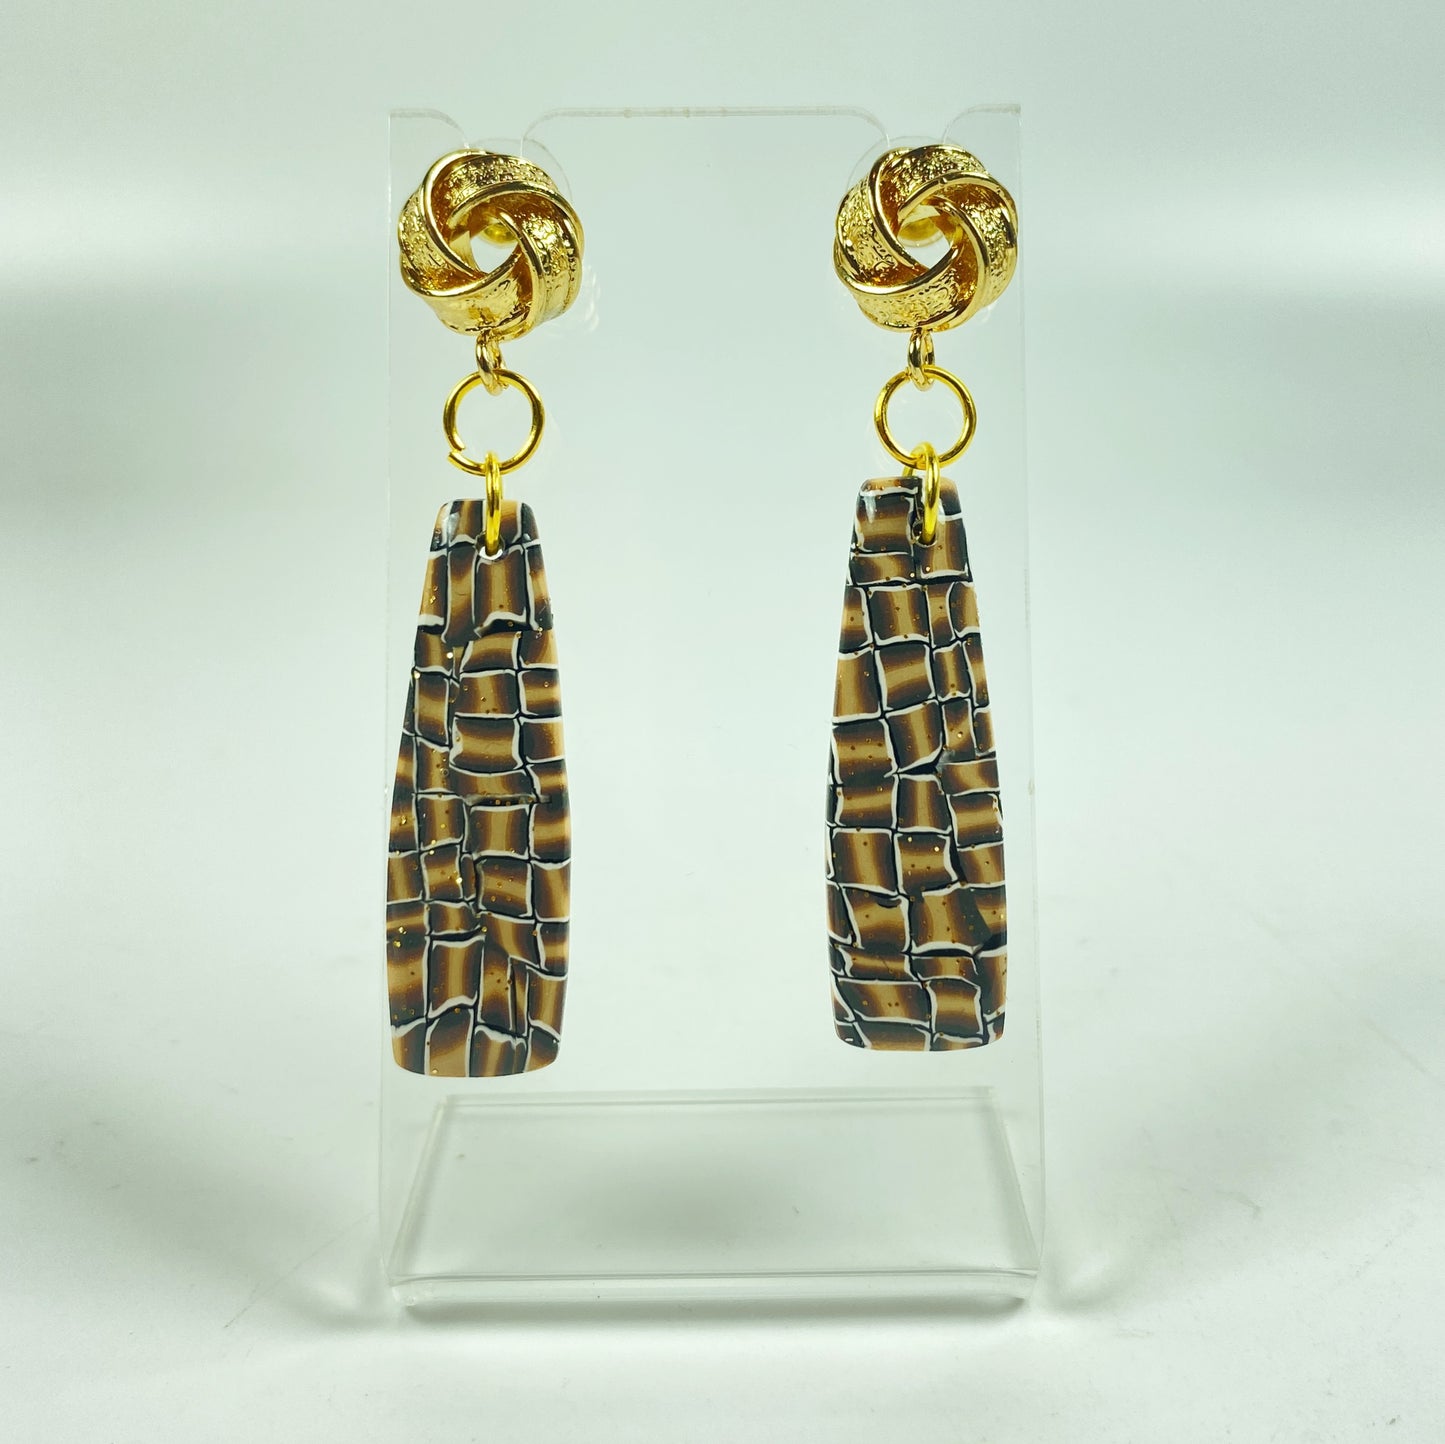 Golden Lattice Polymer Clay Handmade Dangle Earrings on a small acrylic display stand